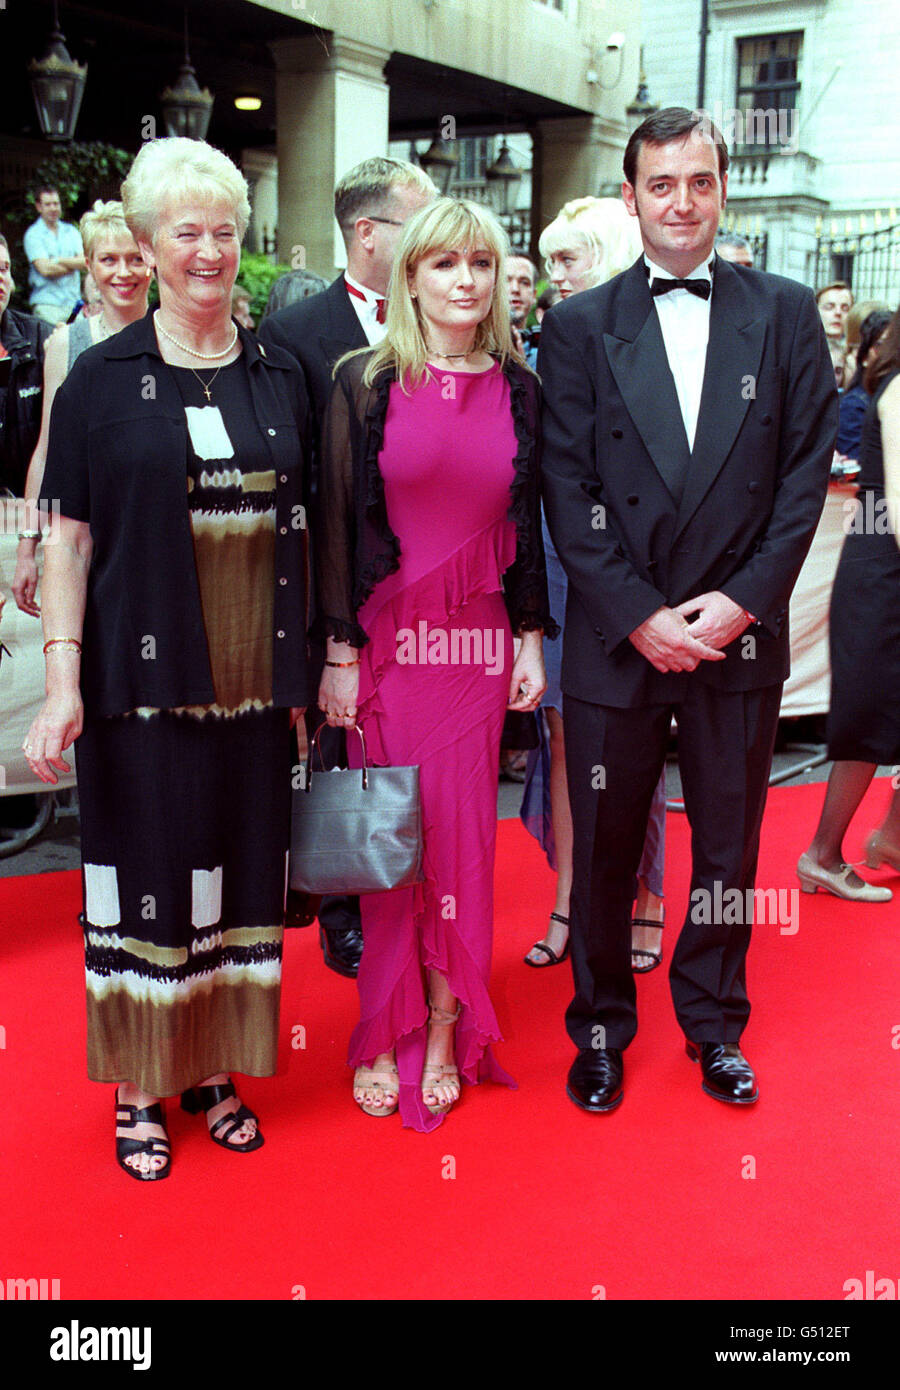 Actress and writer Caroline Aherne (centre) with her mother Maureen, and actor Craig Cash, from television's The Royle Family, arrive at the British Academy TV Awards (BAFTA's) in London. Stock Photo